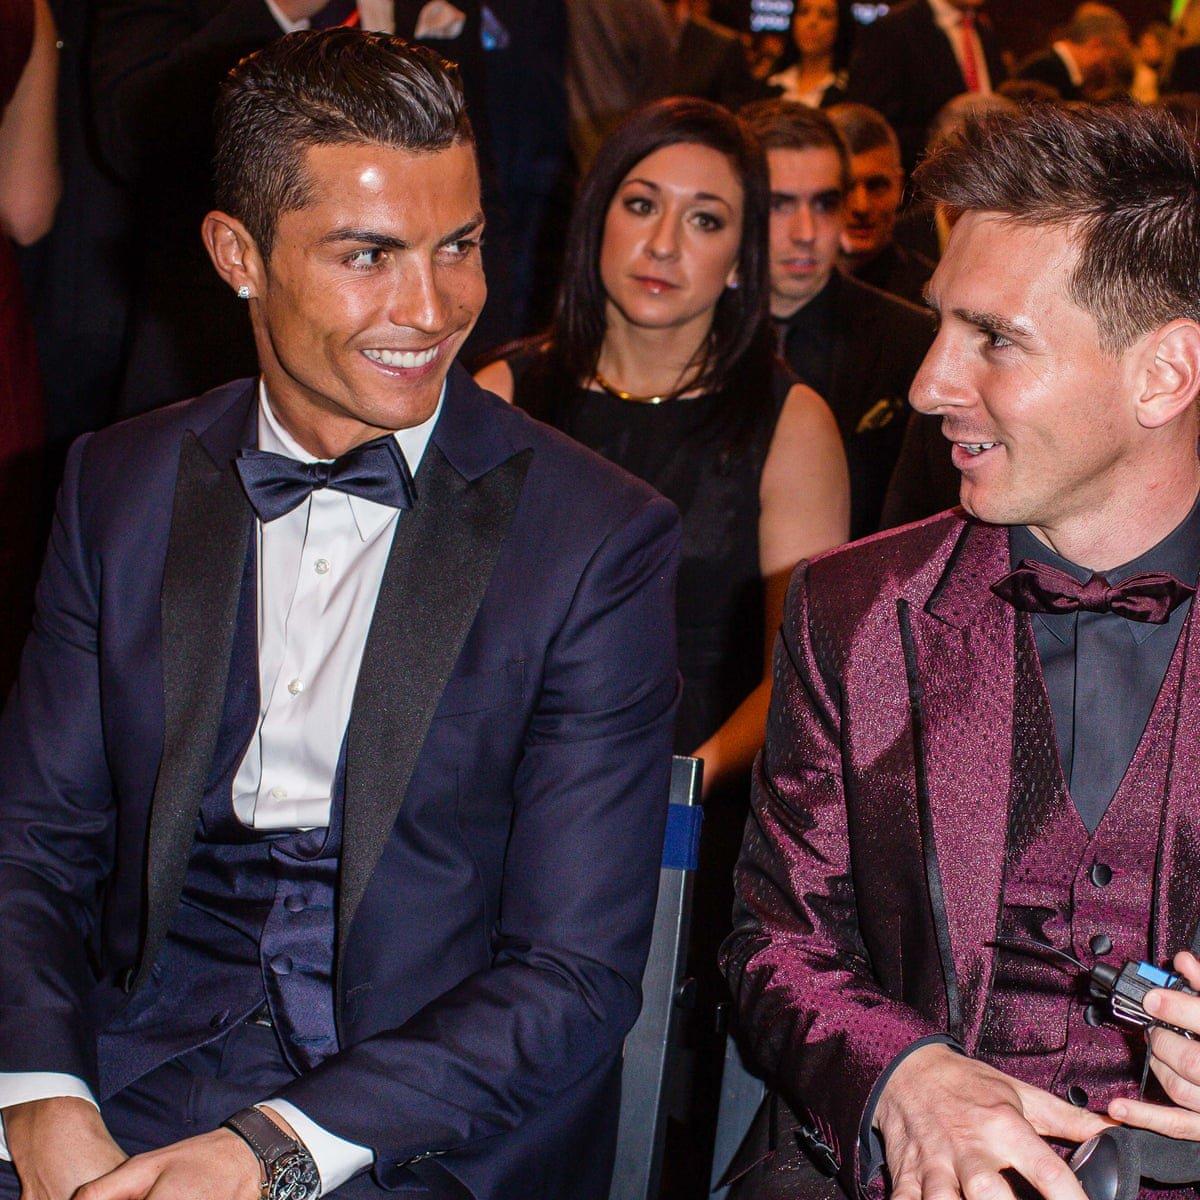 8. What was the margin between his Ballon d’or votes and Ronaldo's in 2009?